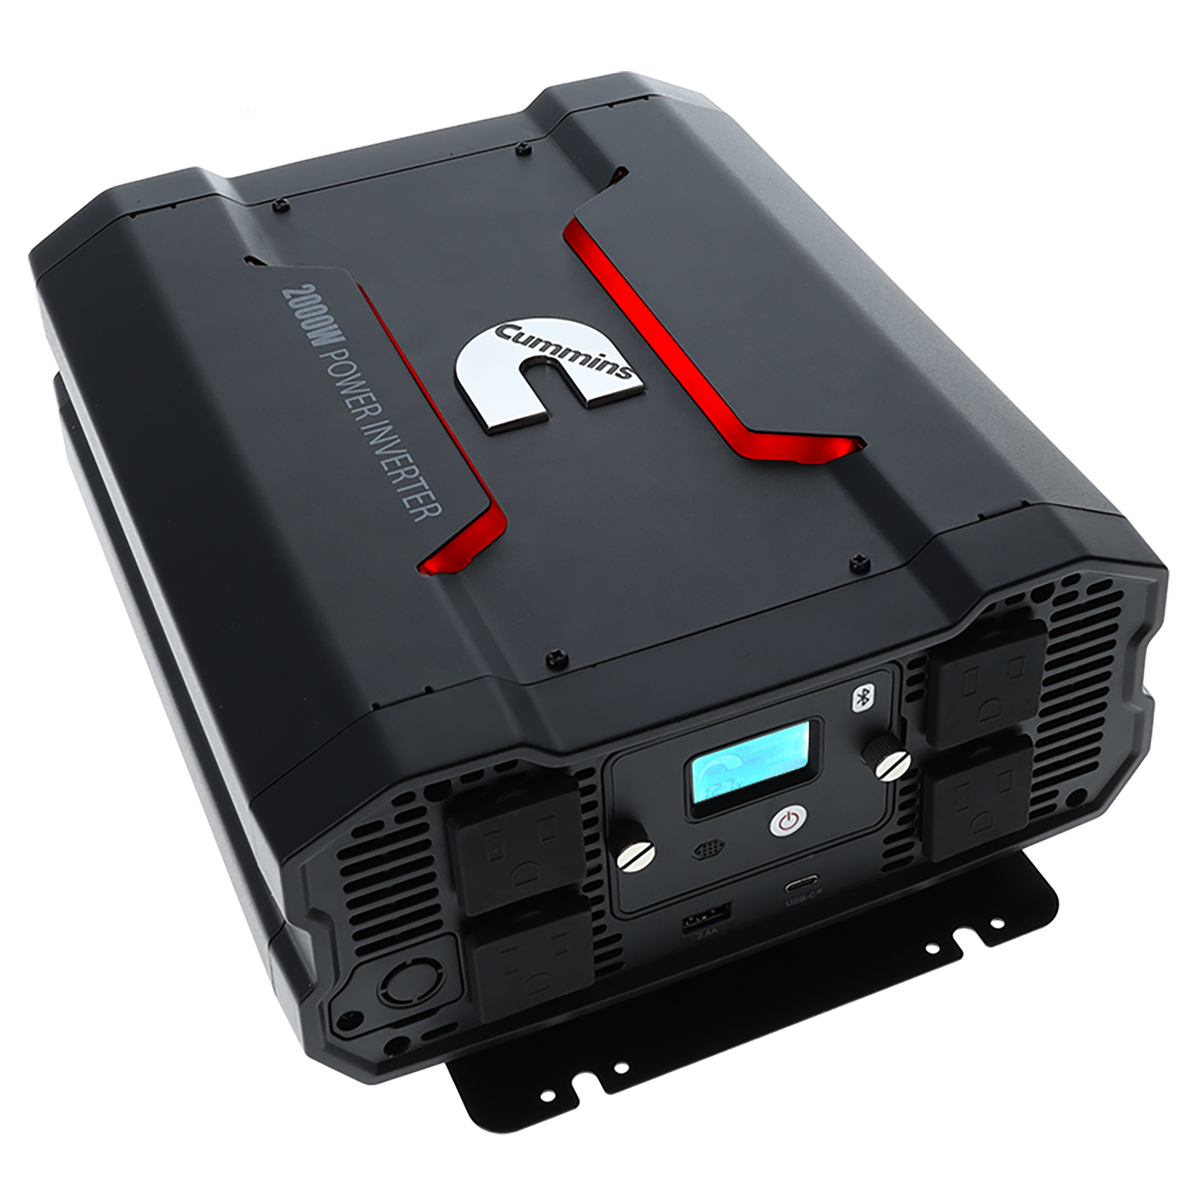 Cummins 2000 Watt Power Inverter Modified Sine Wave Truck Inverter 12V to 110 Volts Four AC Outlets Two USB Ports (Full Cable Ki